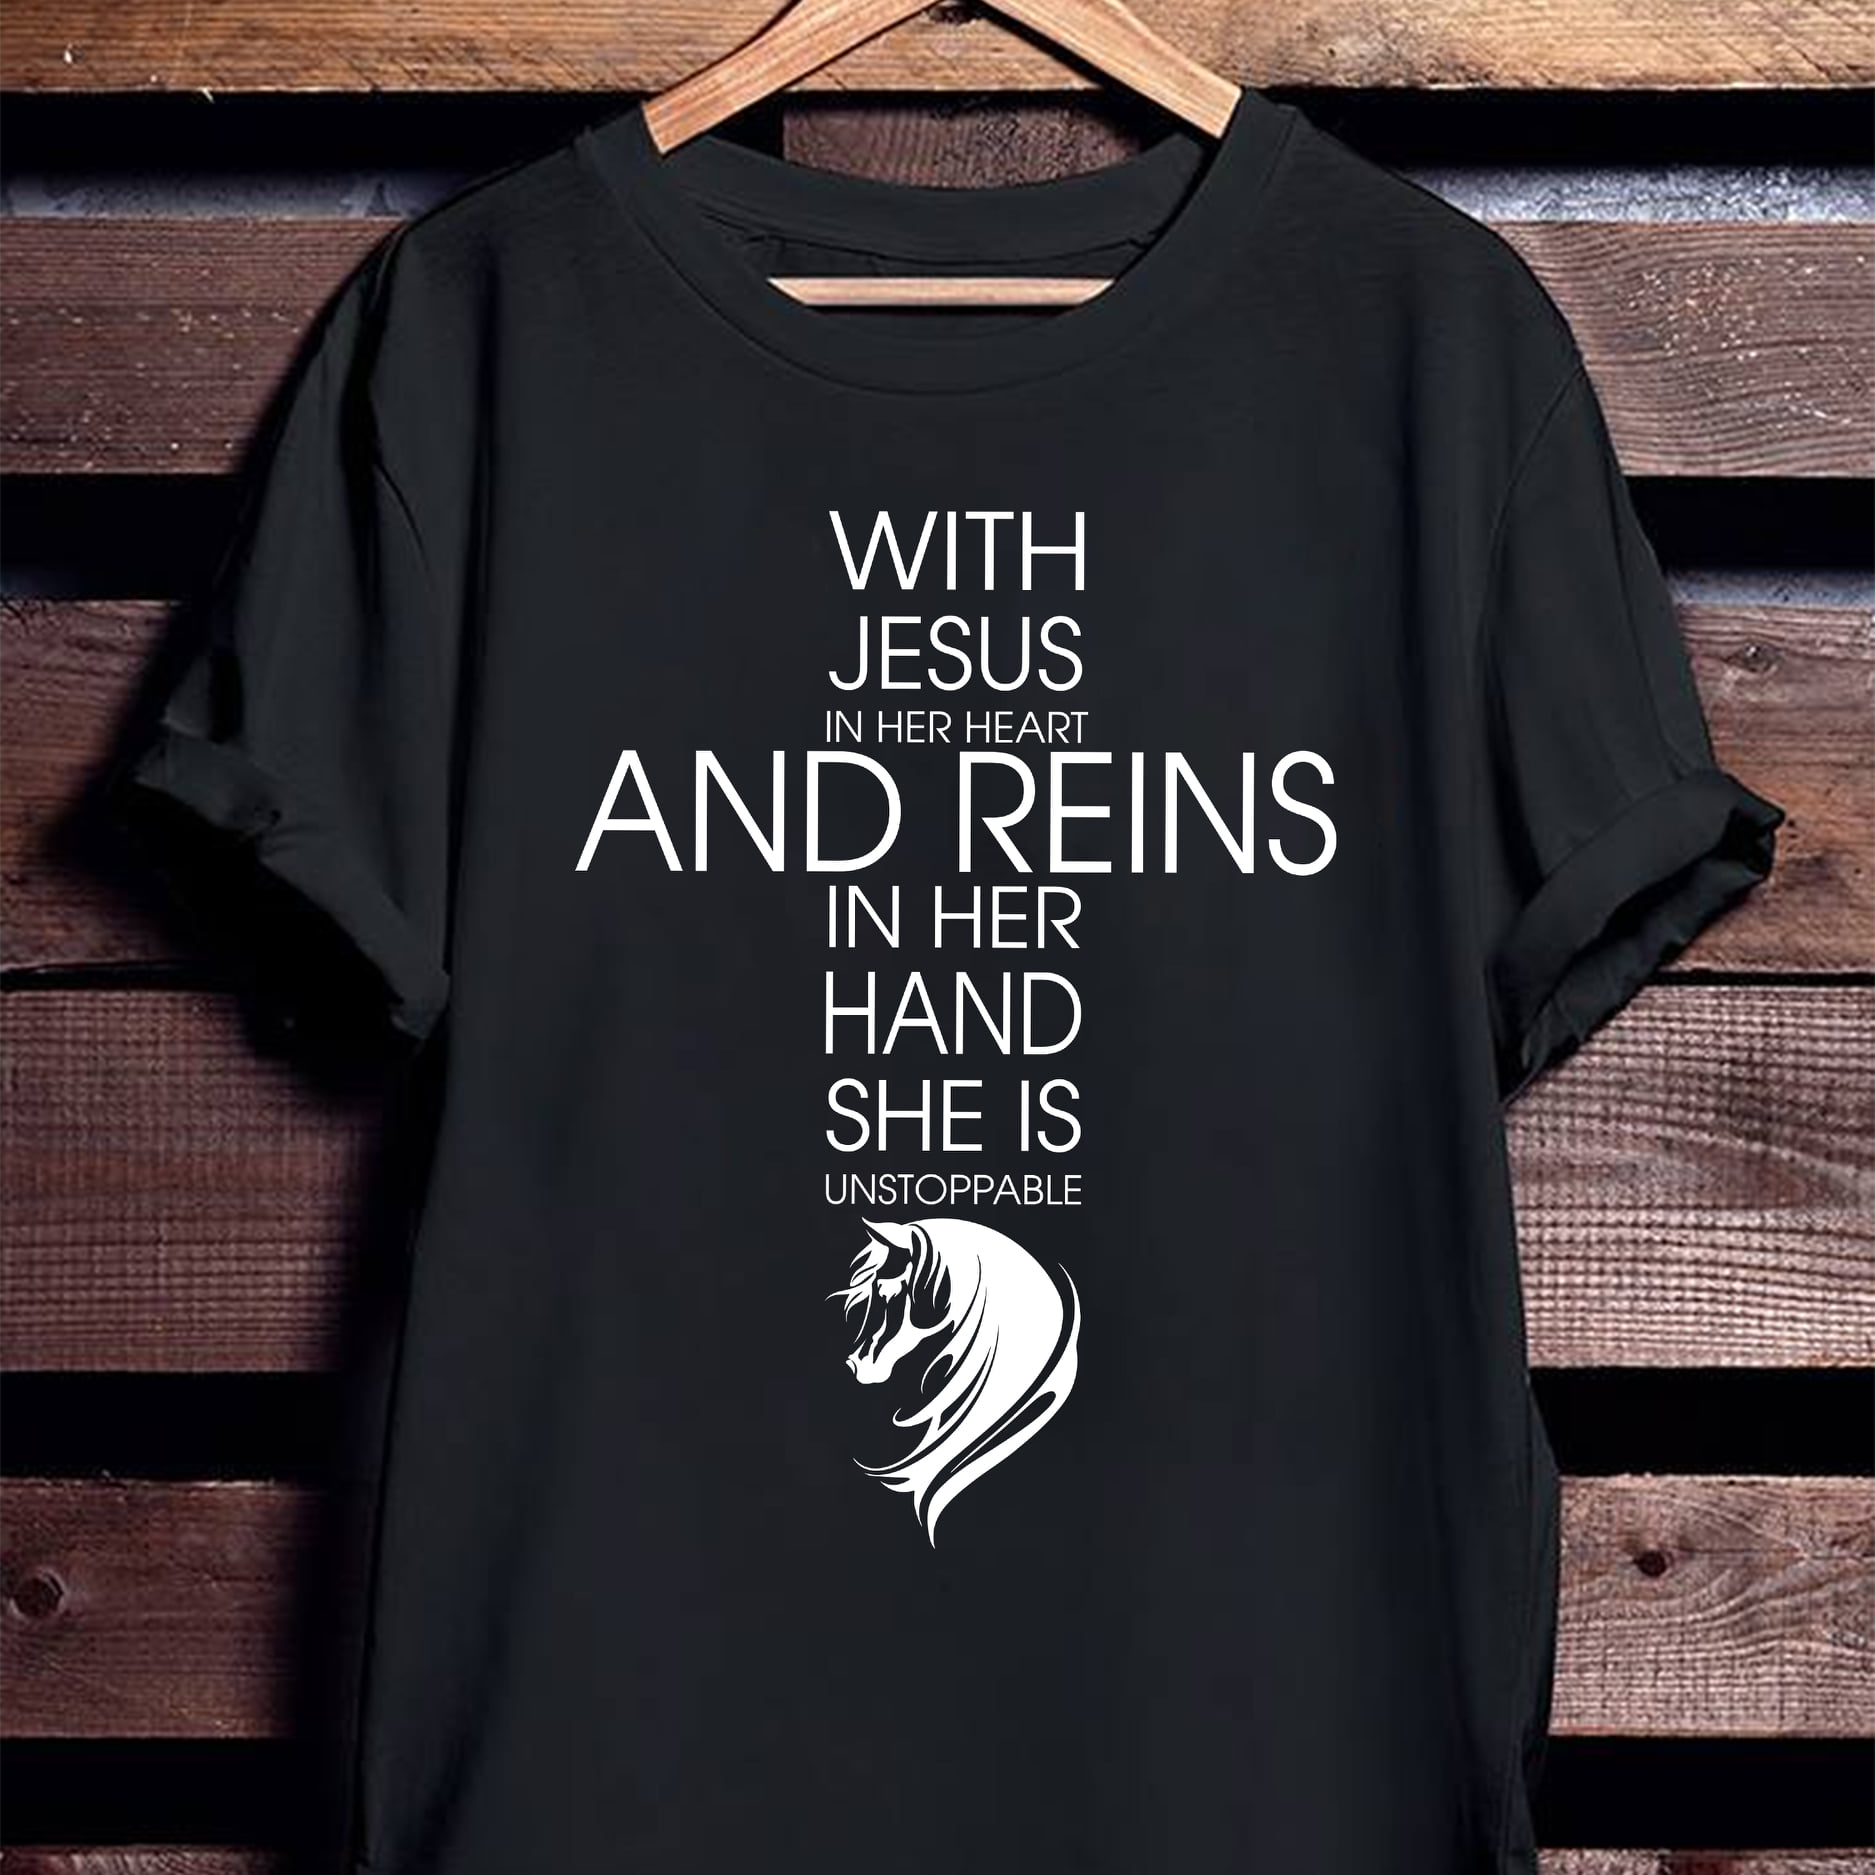 With Jesus in her heart and Reins in her hand she is unstoppable